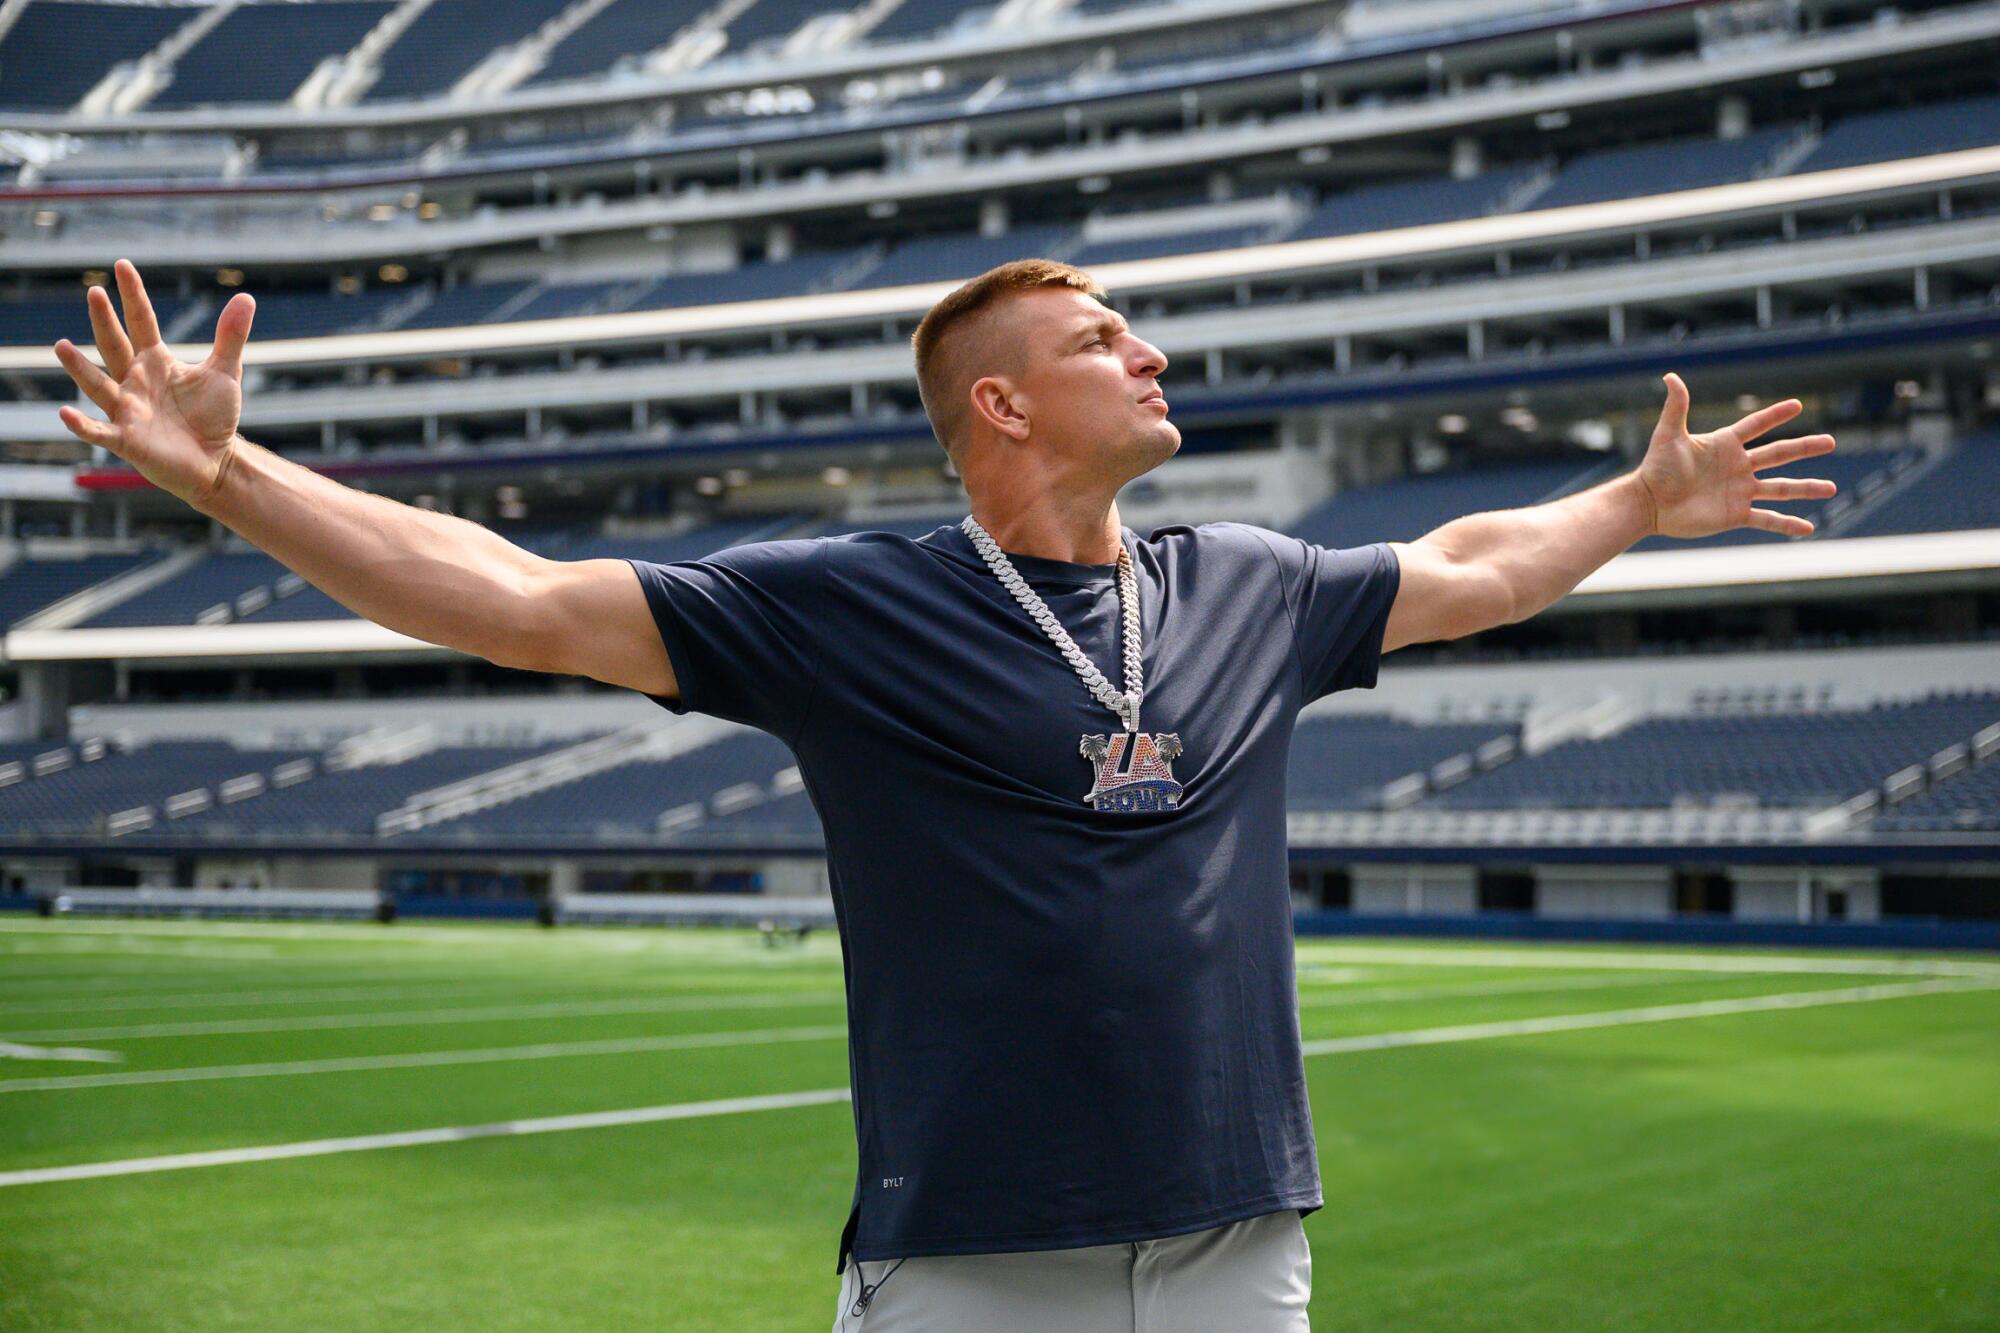 Former NFL tight end Rob Gronkowski stands on the field at SoFi Stadium